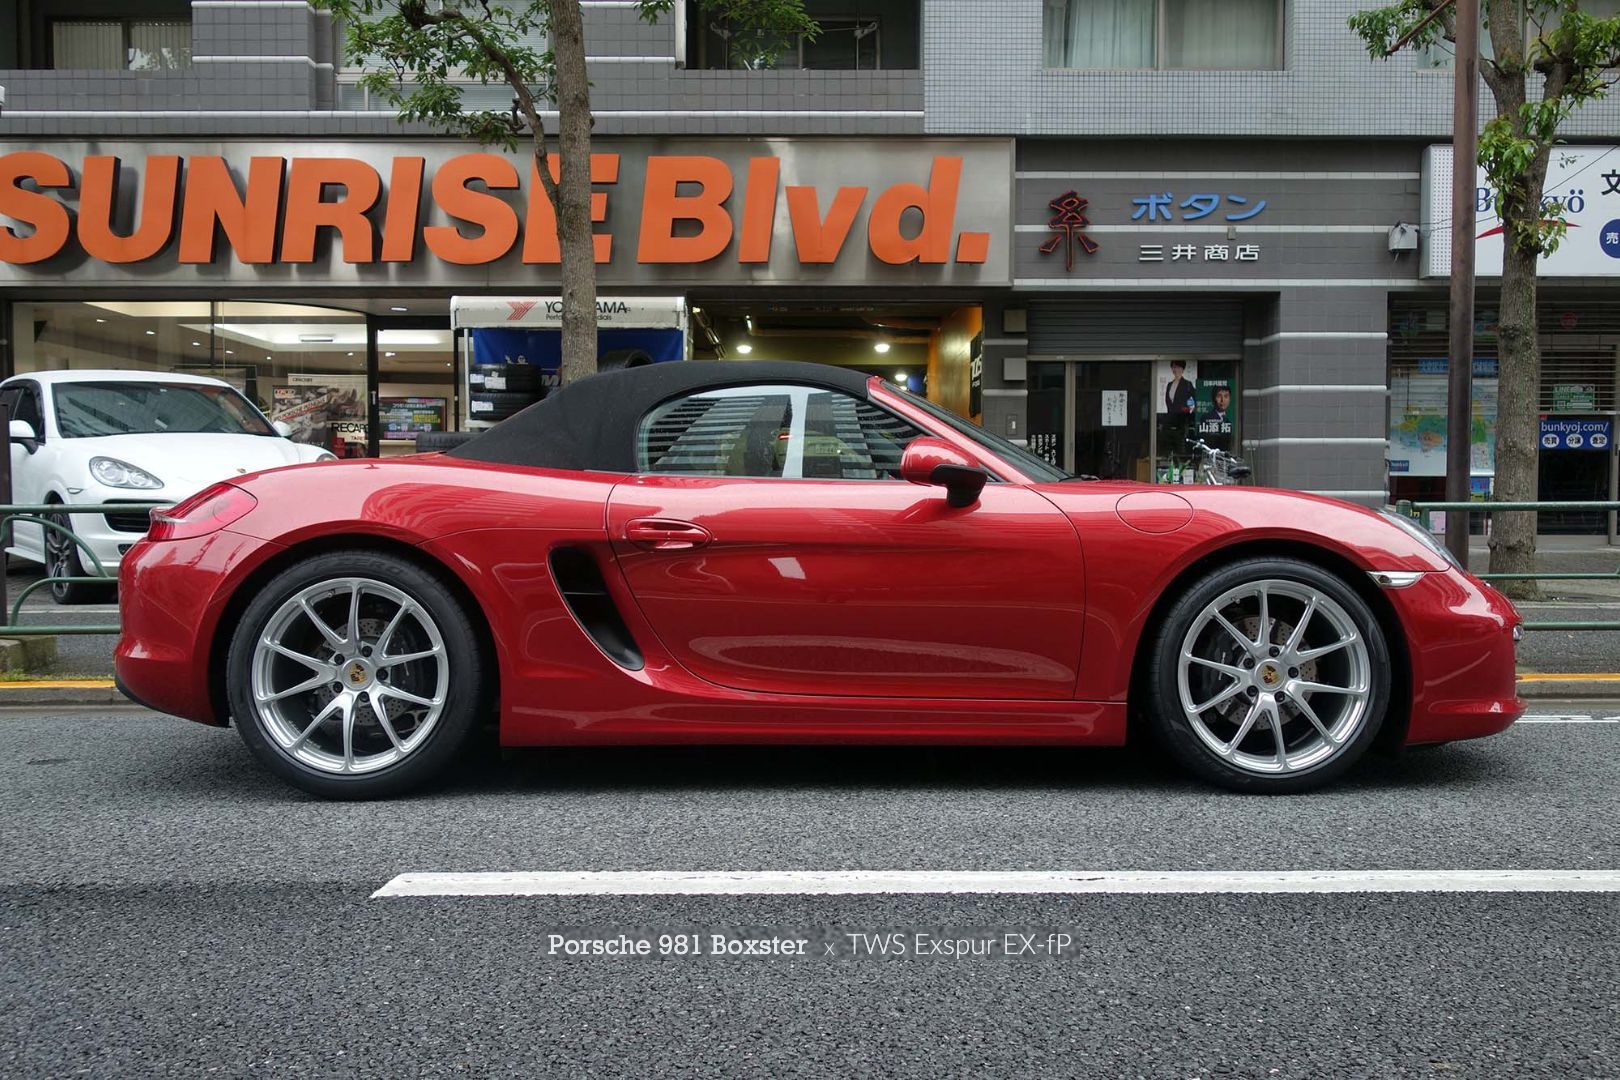 Porsche Boxster with 19×8.5 and 19×10-inch TWS Forged EXspur EX-fP